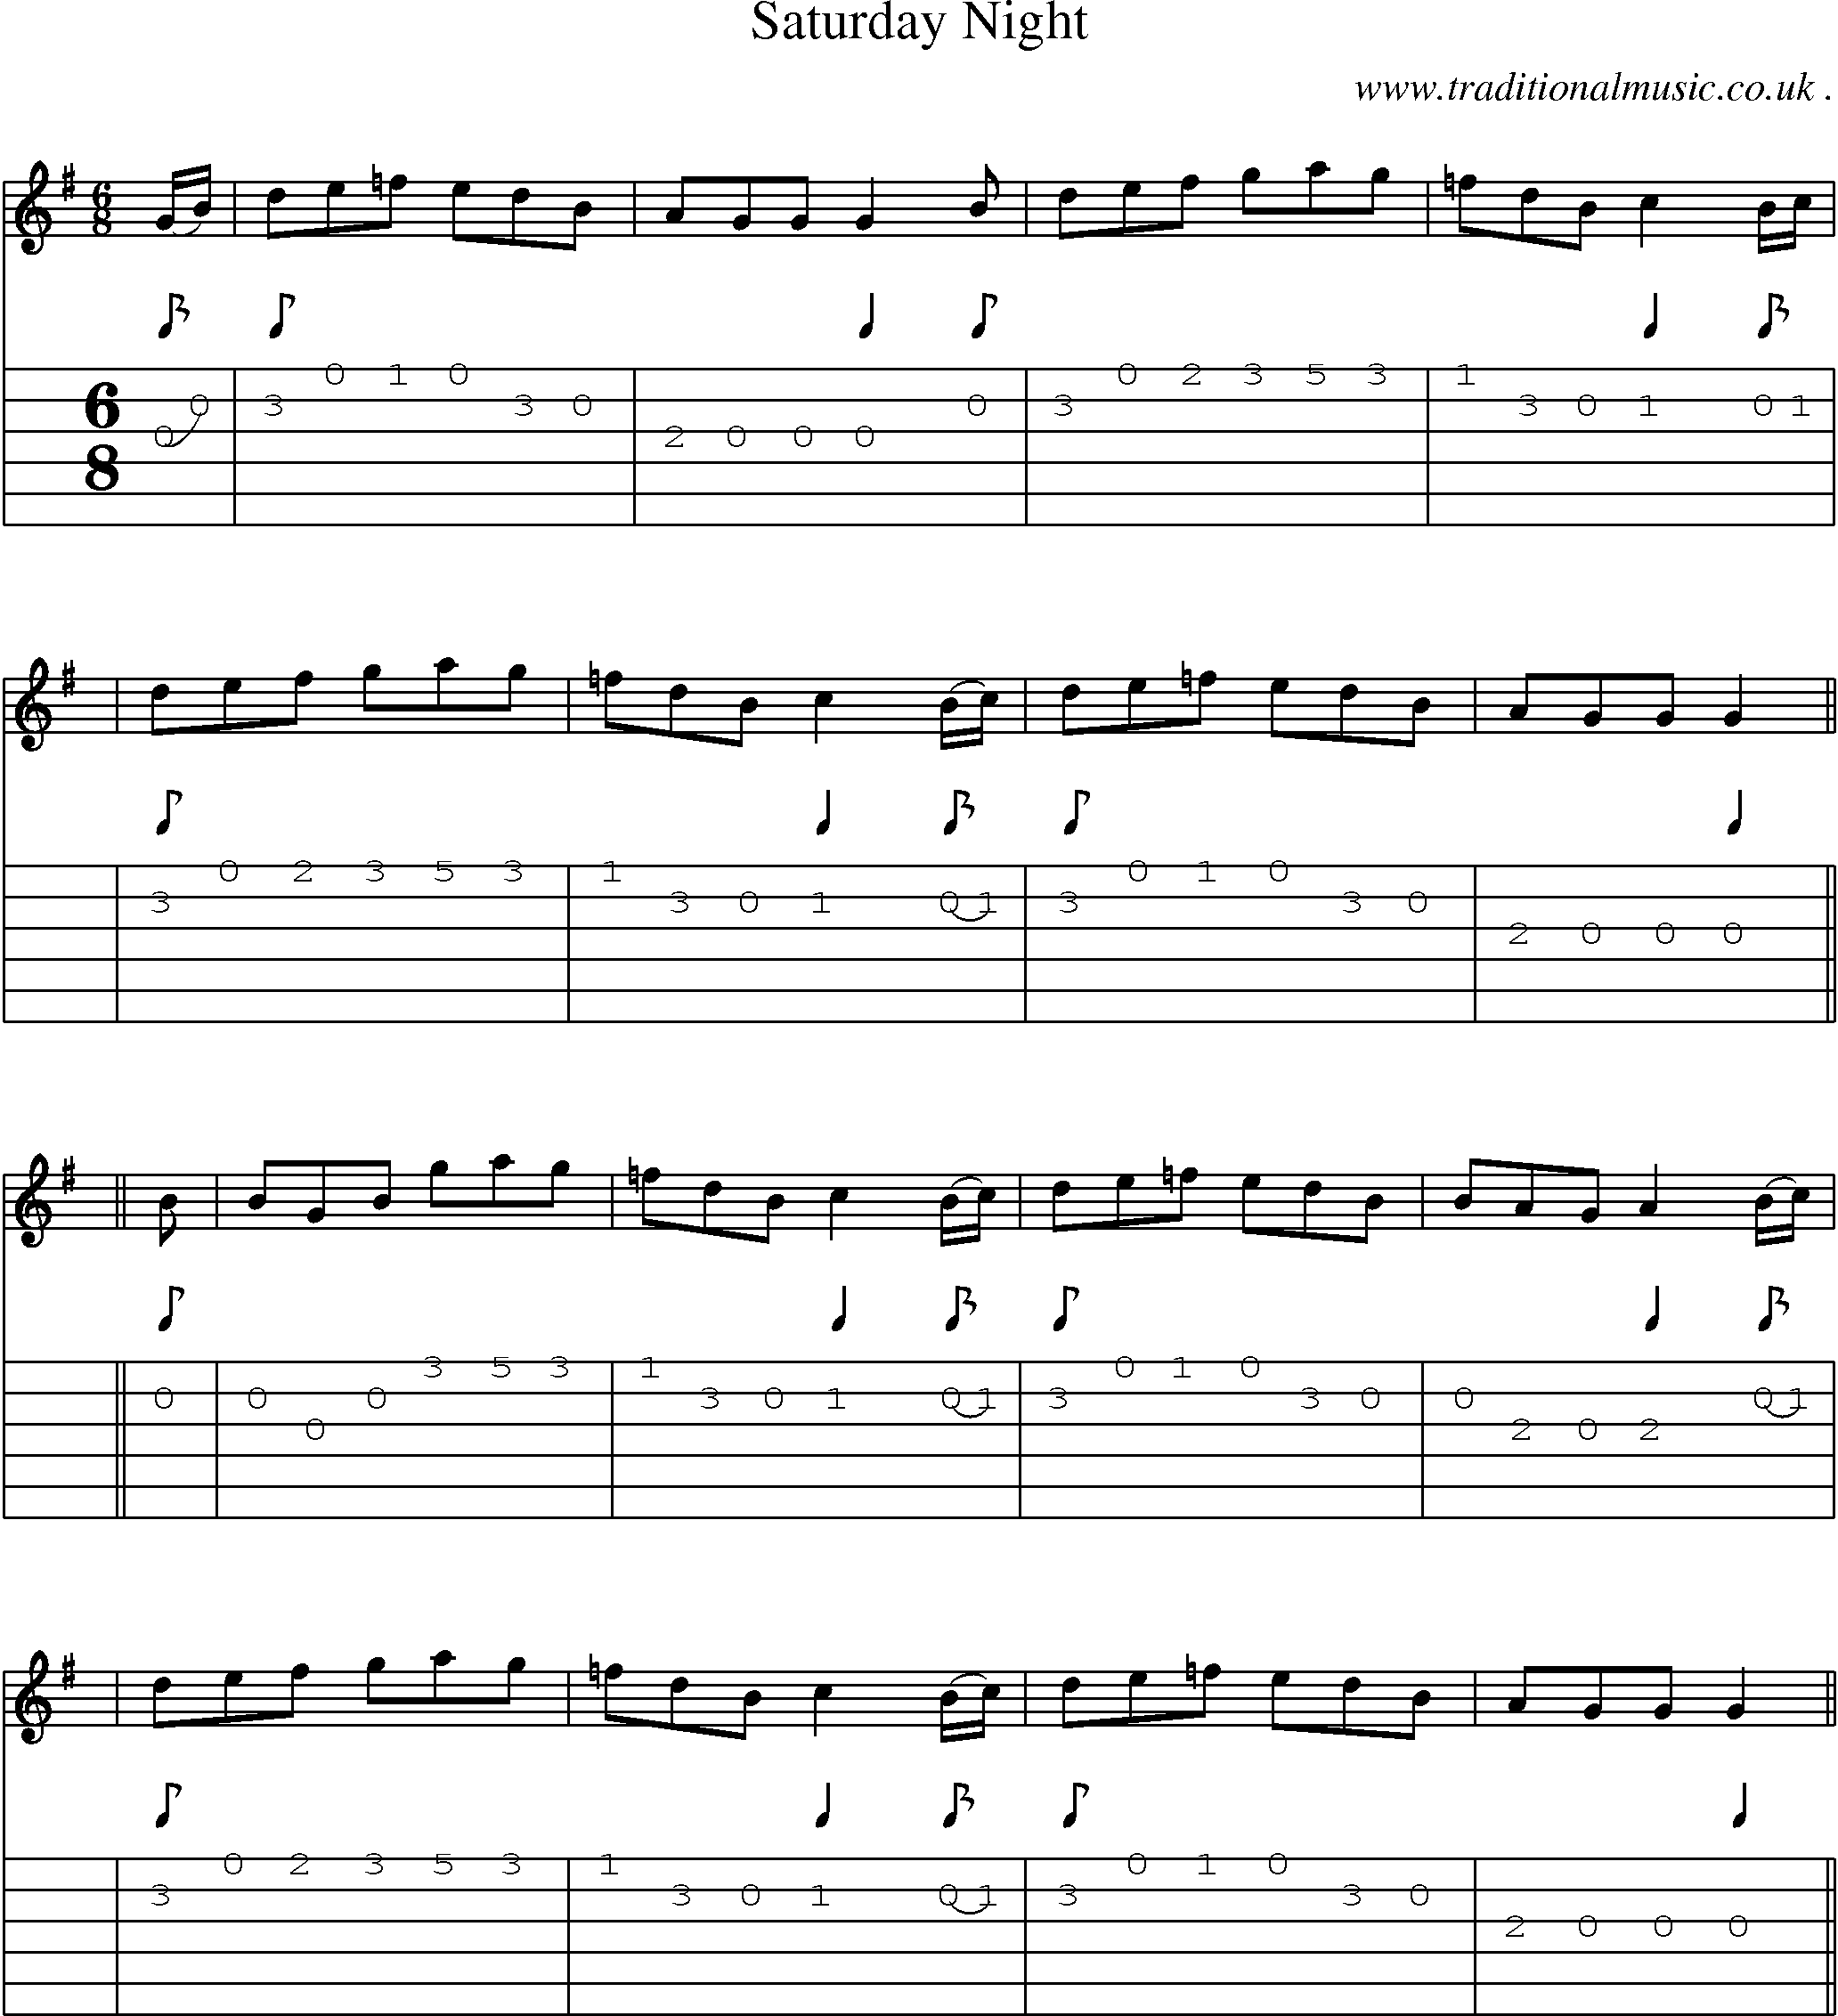 Sheet-music  score, Chords and Guitar Tabs for Saturday Night